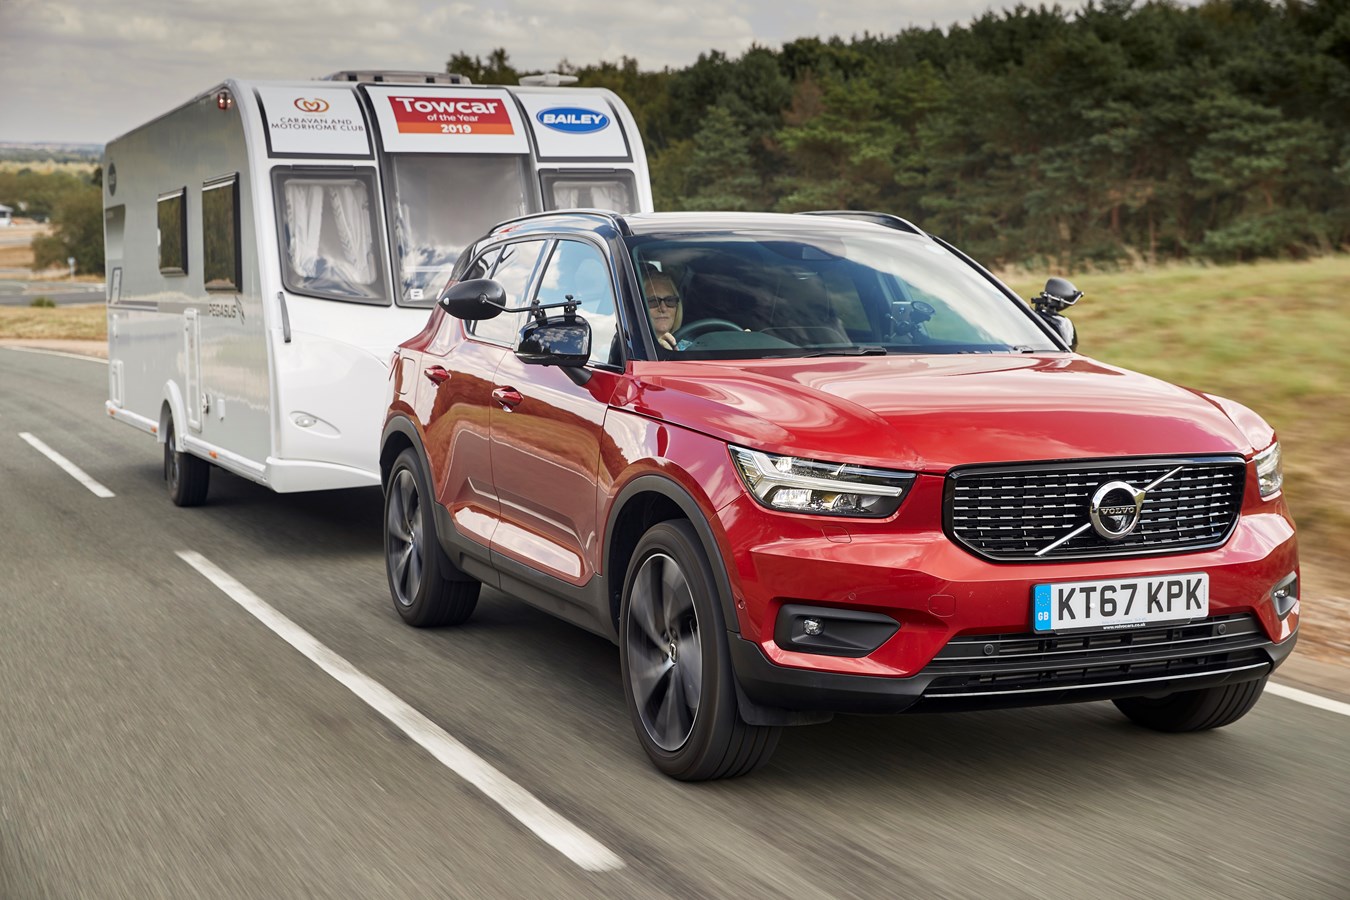 Volvo XC40 wins award in 2019 Caravan and Motorhome Club Towcar of the Year Competition